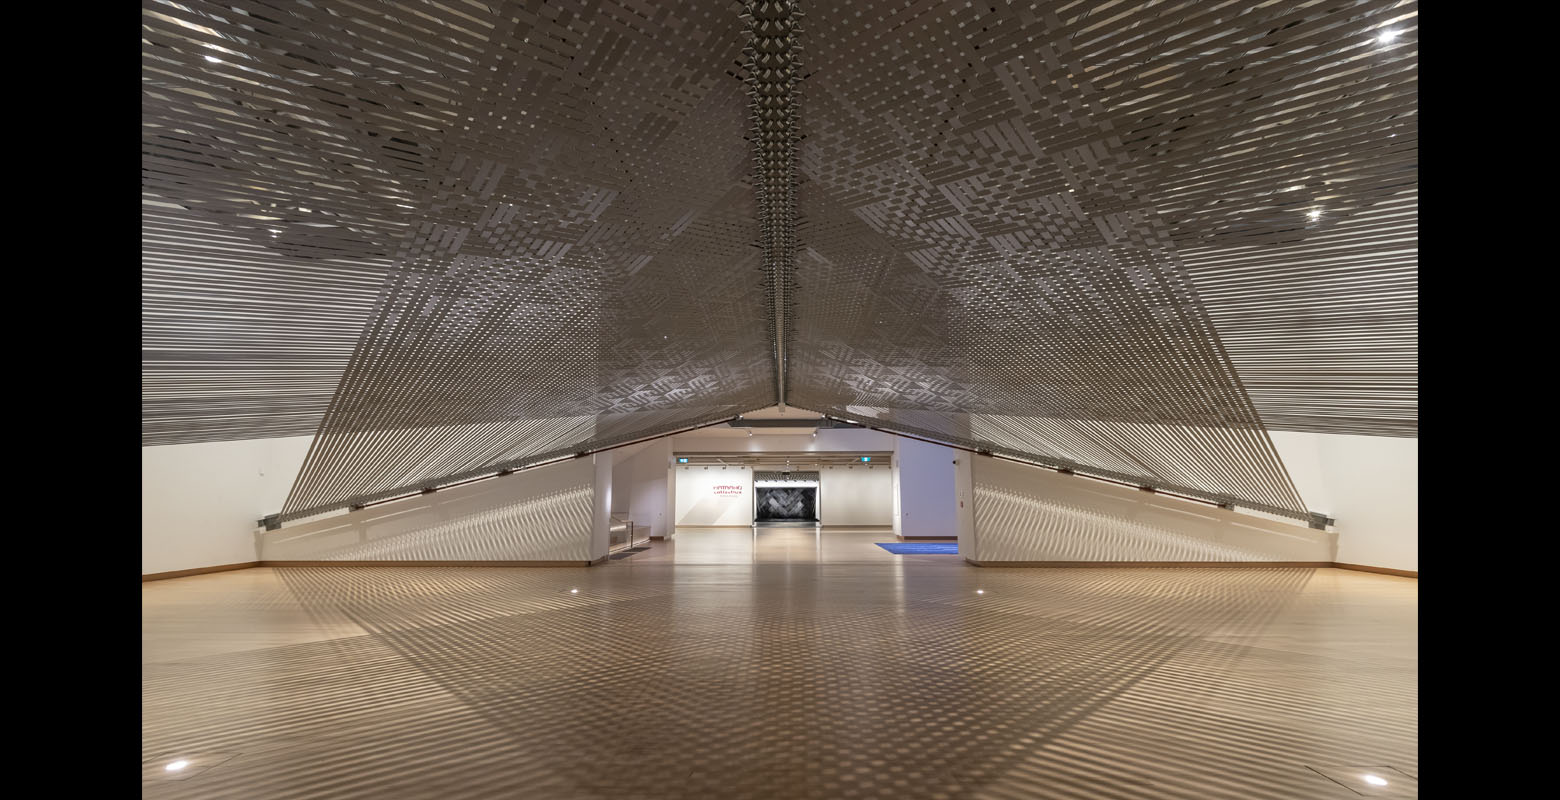 A large-scale, woven installation that is suspended from above and spans a double-height gallery space with a wooden floor and white walls. Woven, grey and reflective tie-downs create shadows and reflections on the walls and floor.